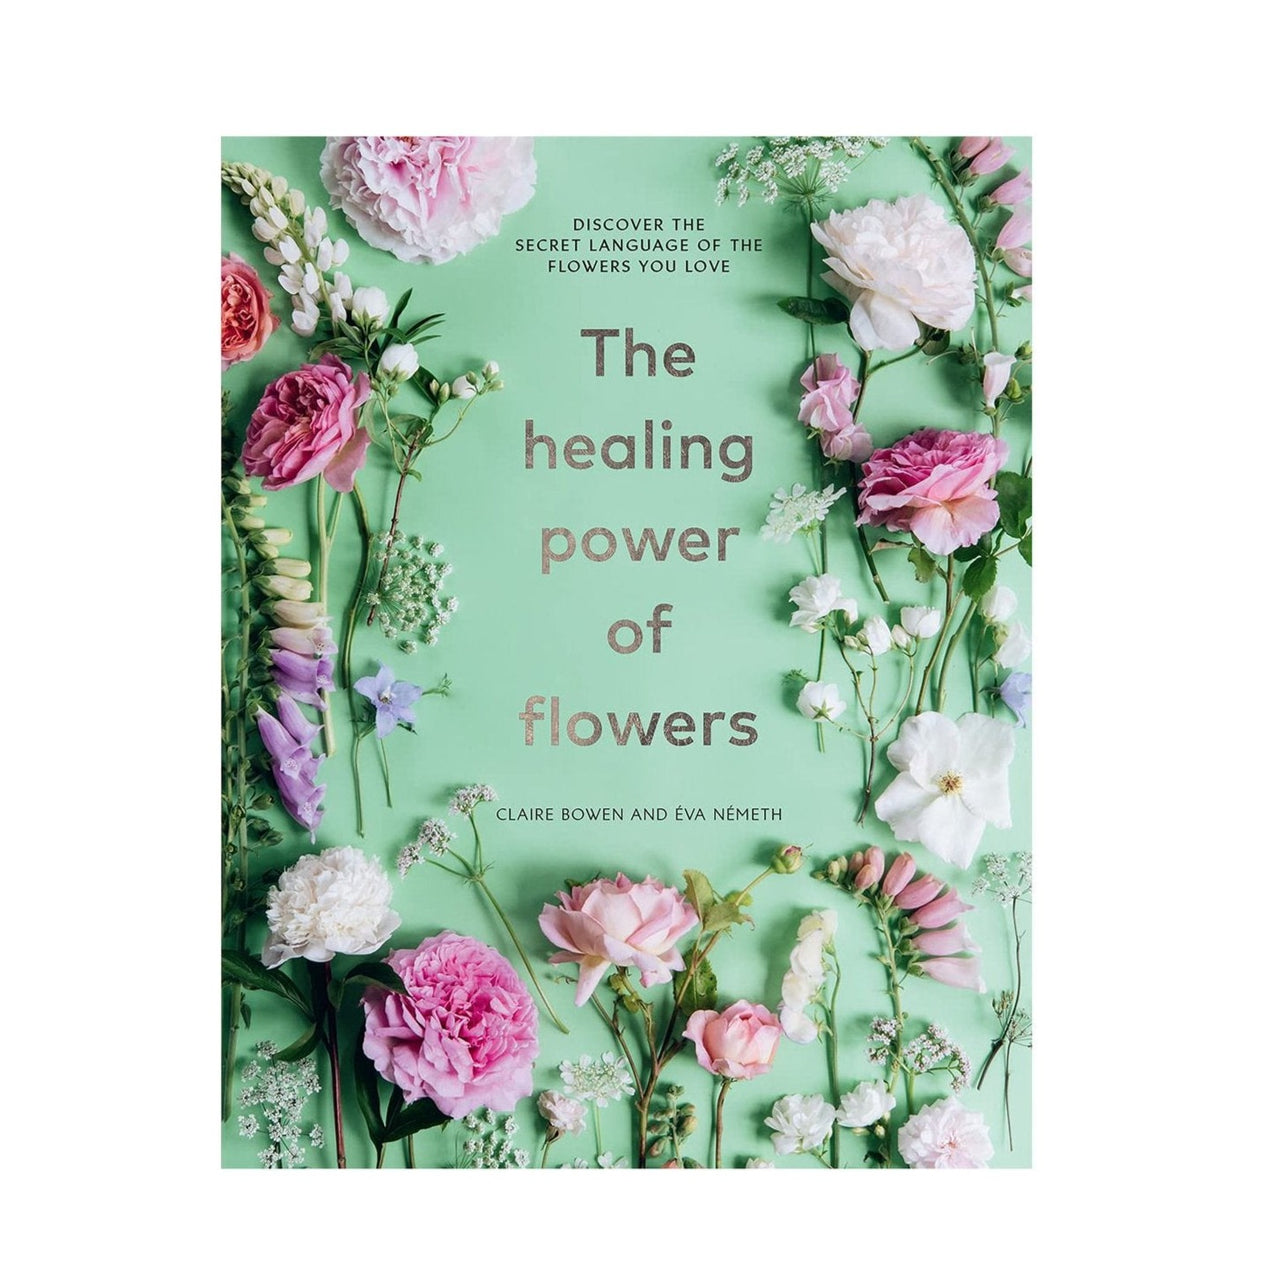 Healing Power of Flowers by Claire Bowen